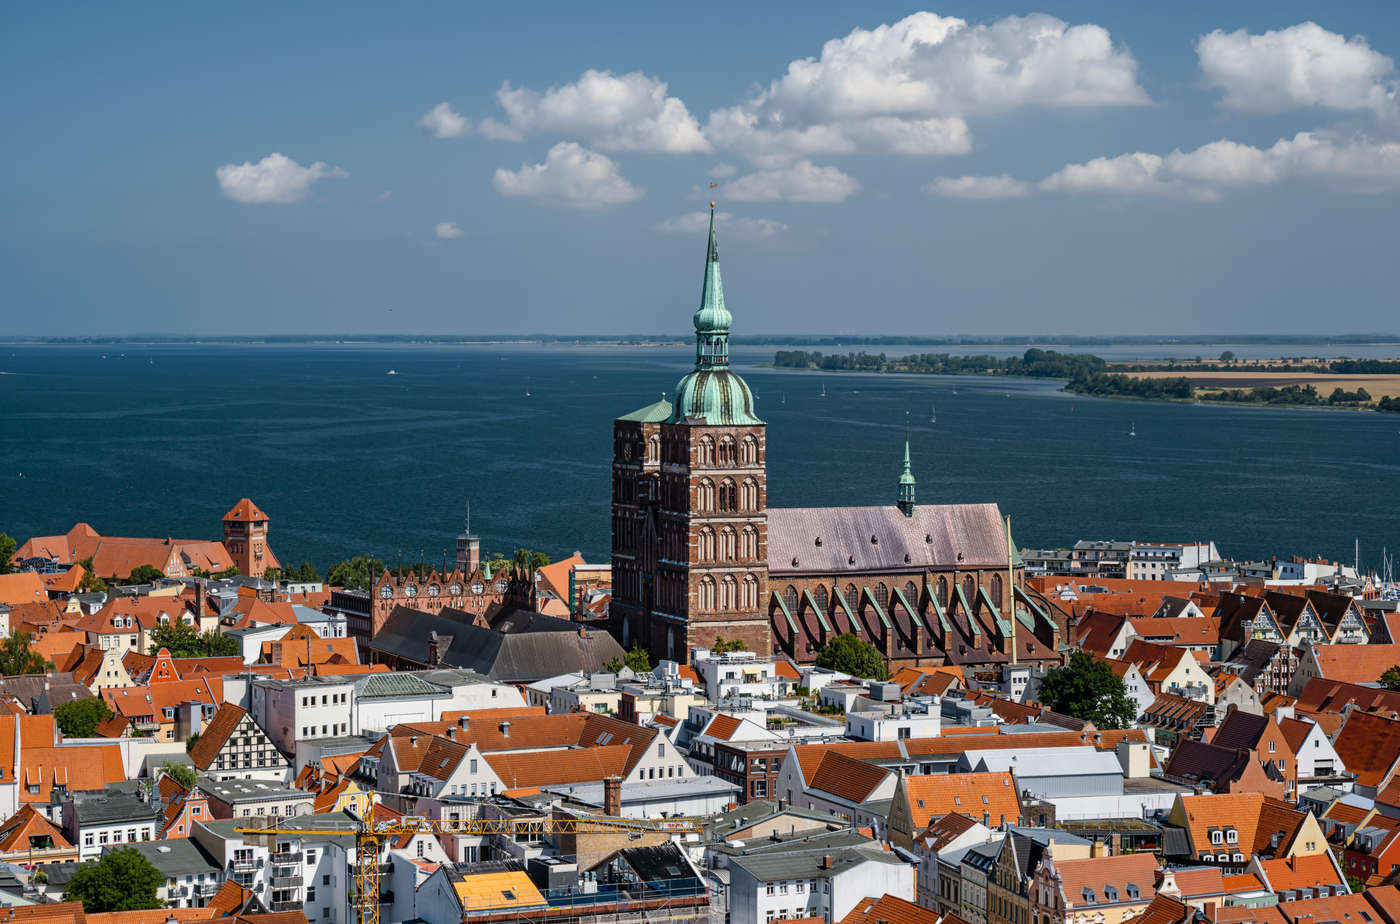 Discover your piece of Stralsund.